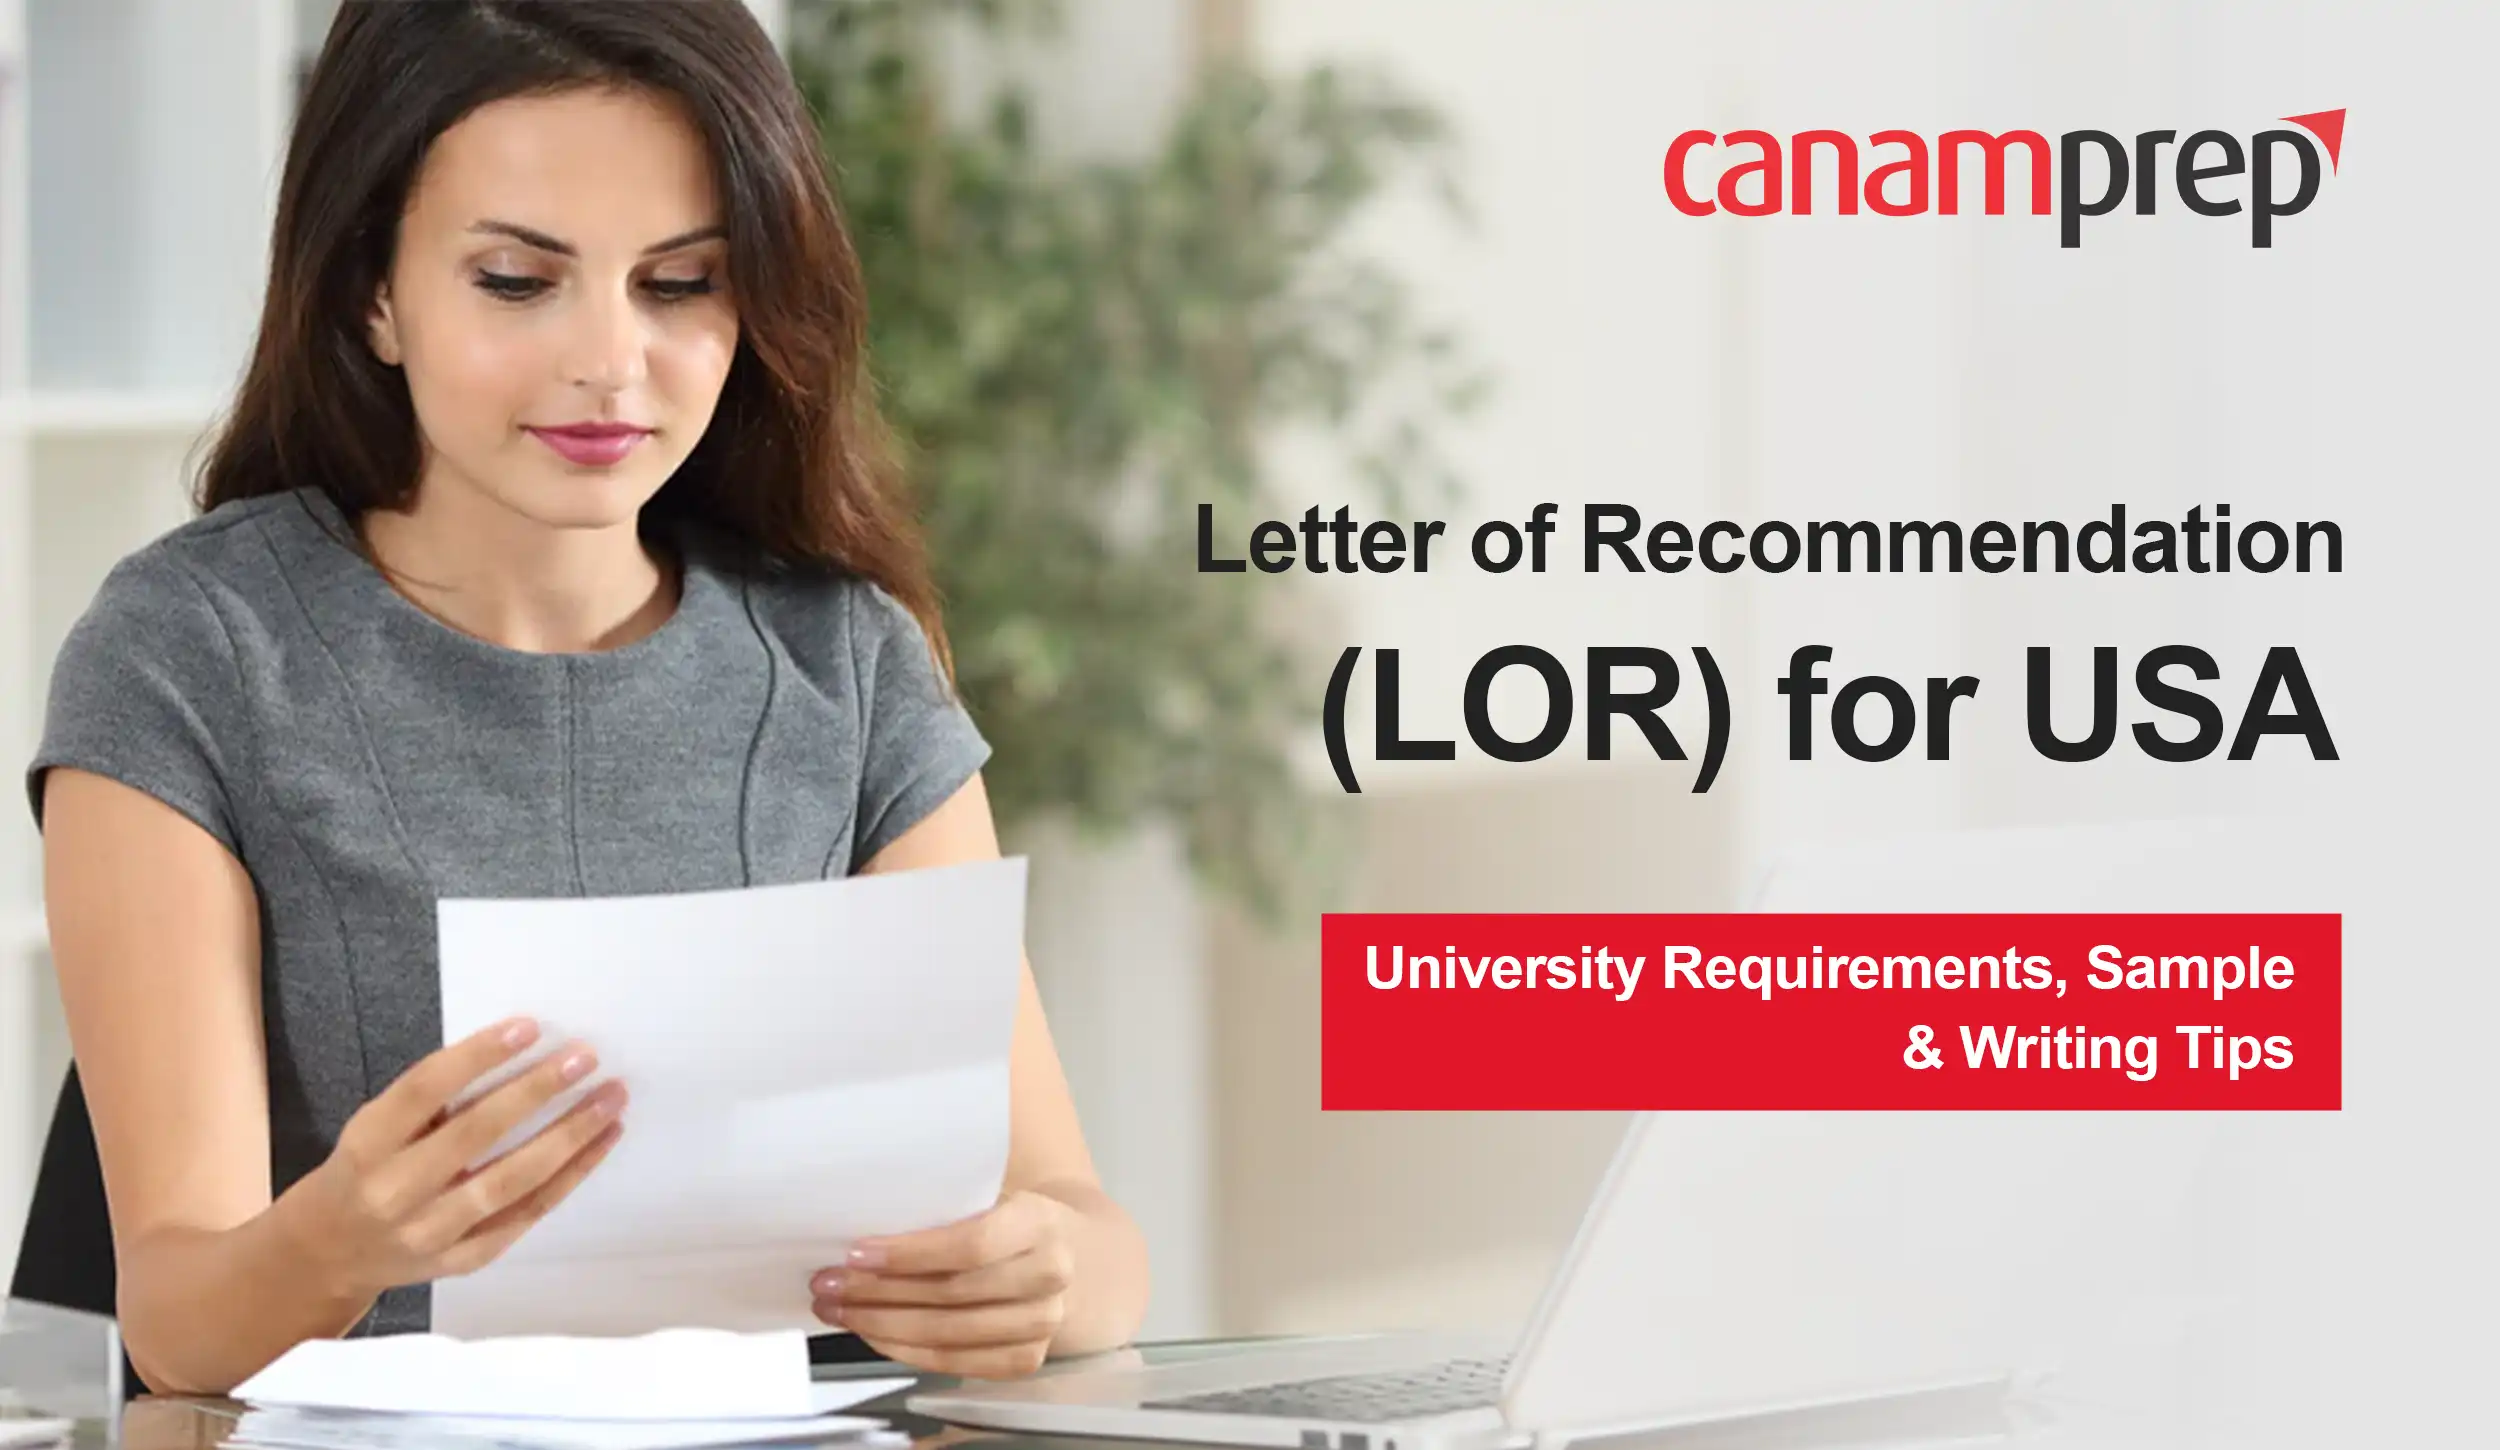 Letter of Recommendation (LOR) for USA: University Requirements, Sample and Writing Tips